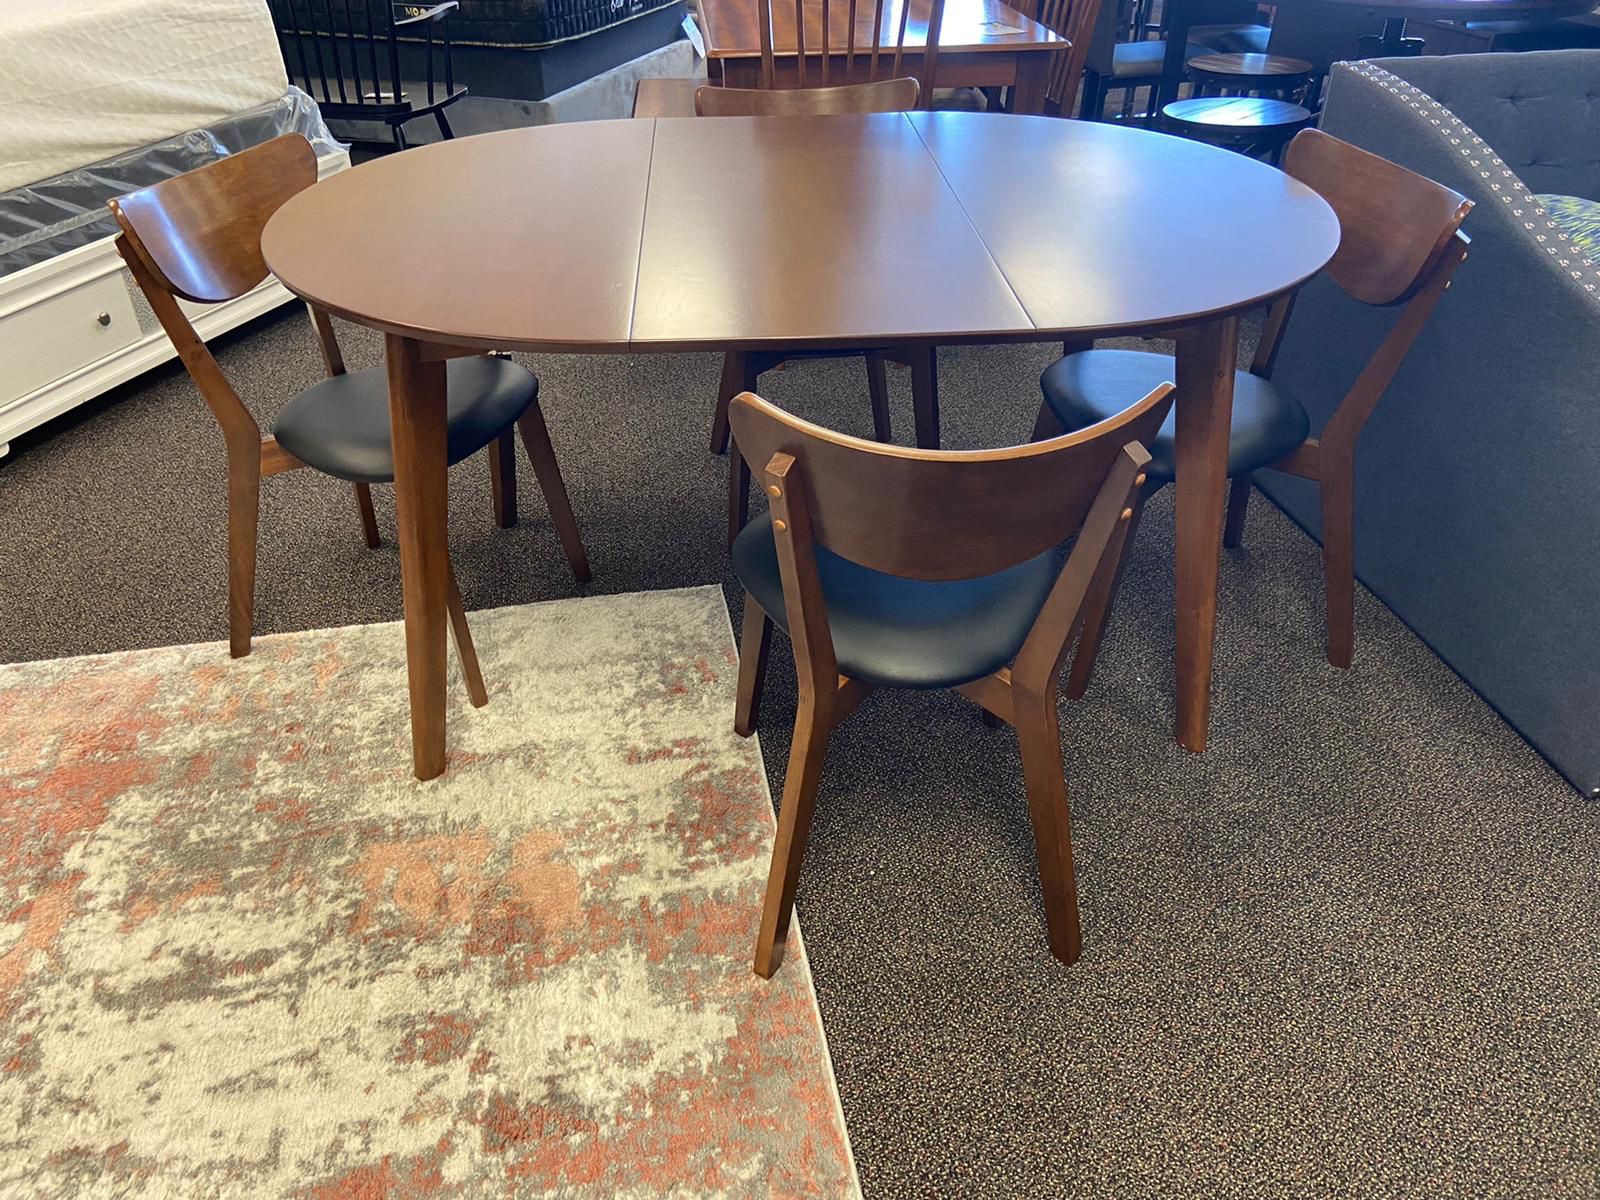 BRAND NEW IN BOX Mid Modern Oval Round Dining Table Set Of 5 w/ Extendable Leaf Mid Century Style B Delivery Available